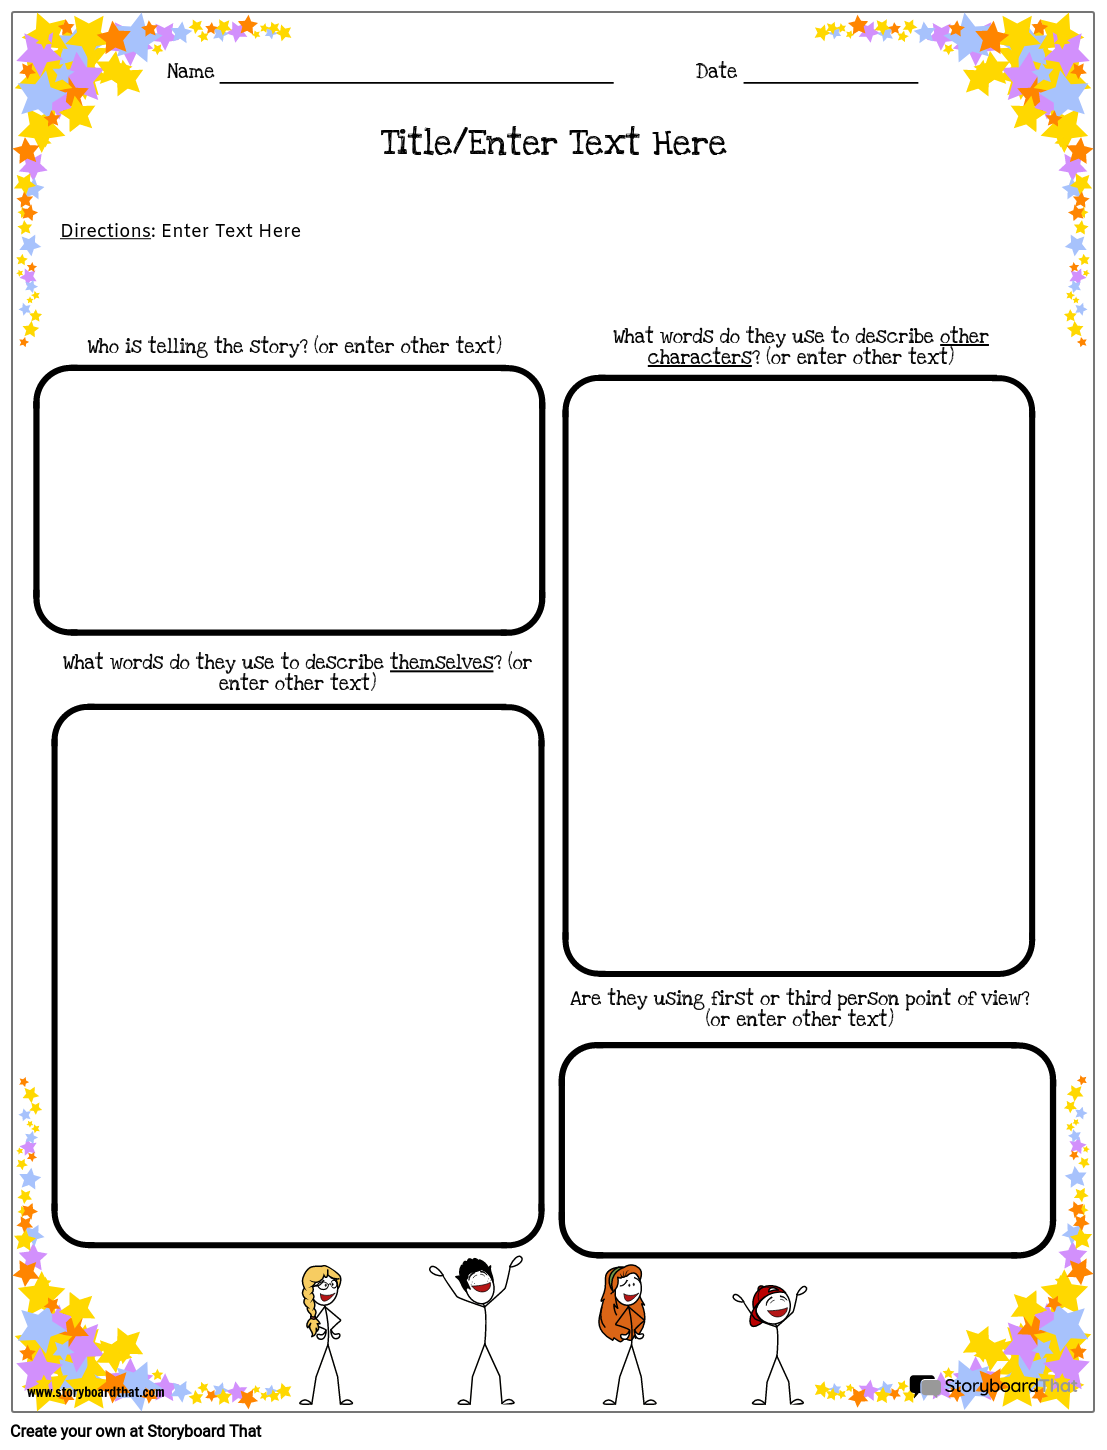 Stars Themed Point of View Worksheet Design